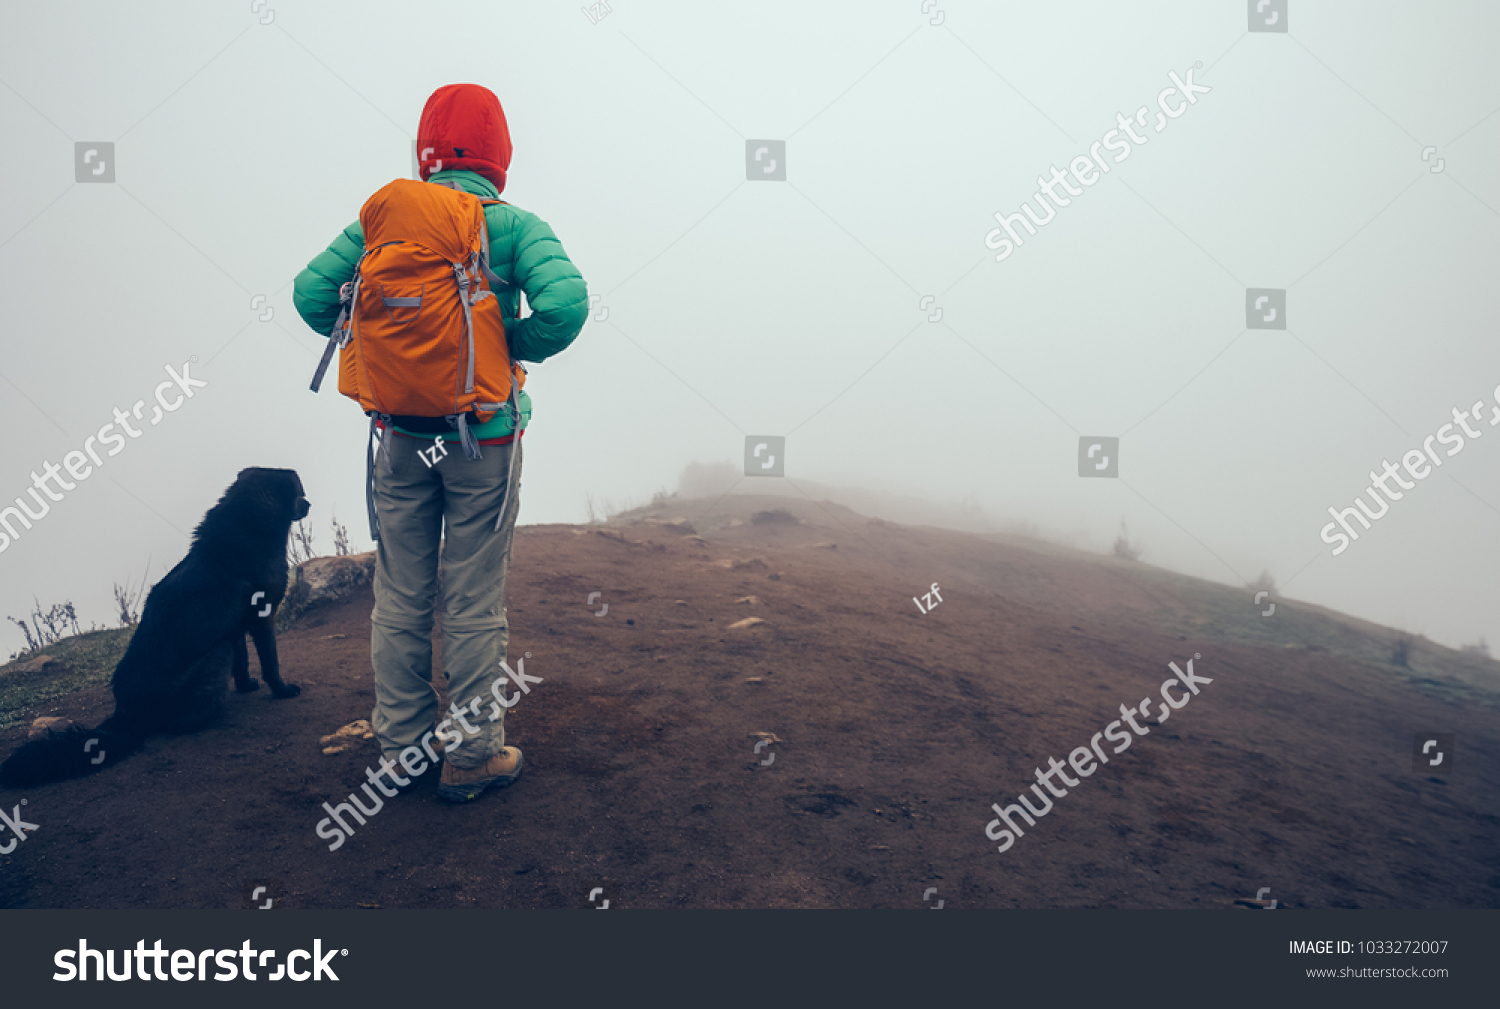 woman backpacker and dog on mountain top in bad weather #1033272007